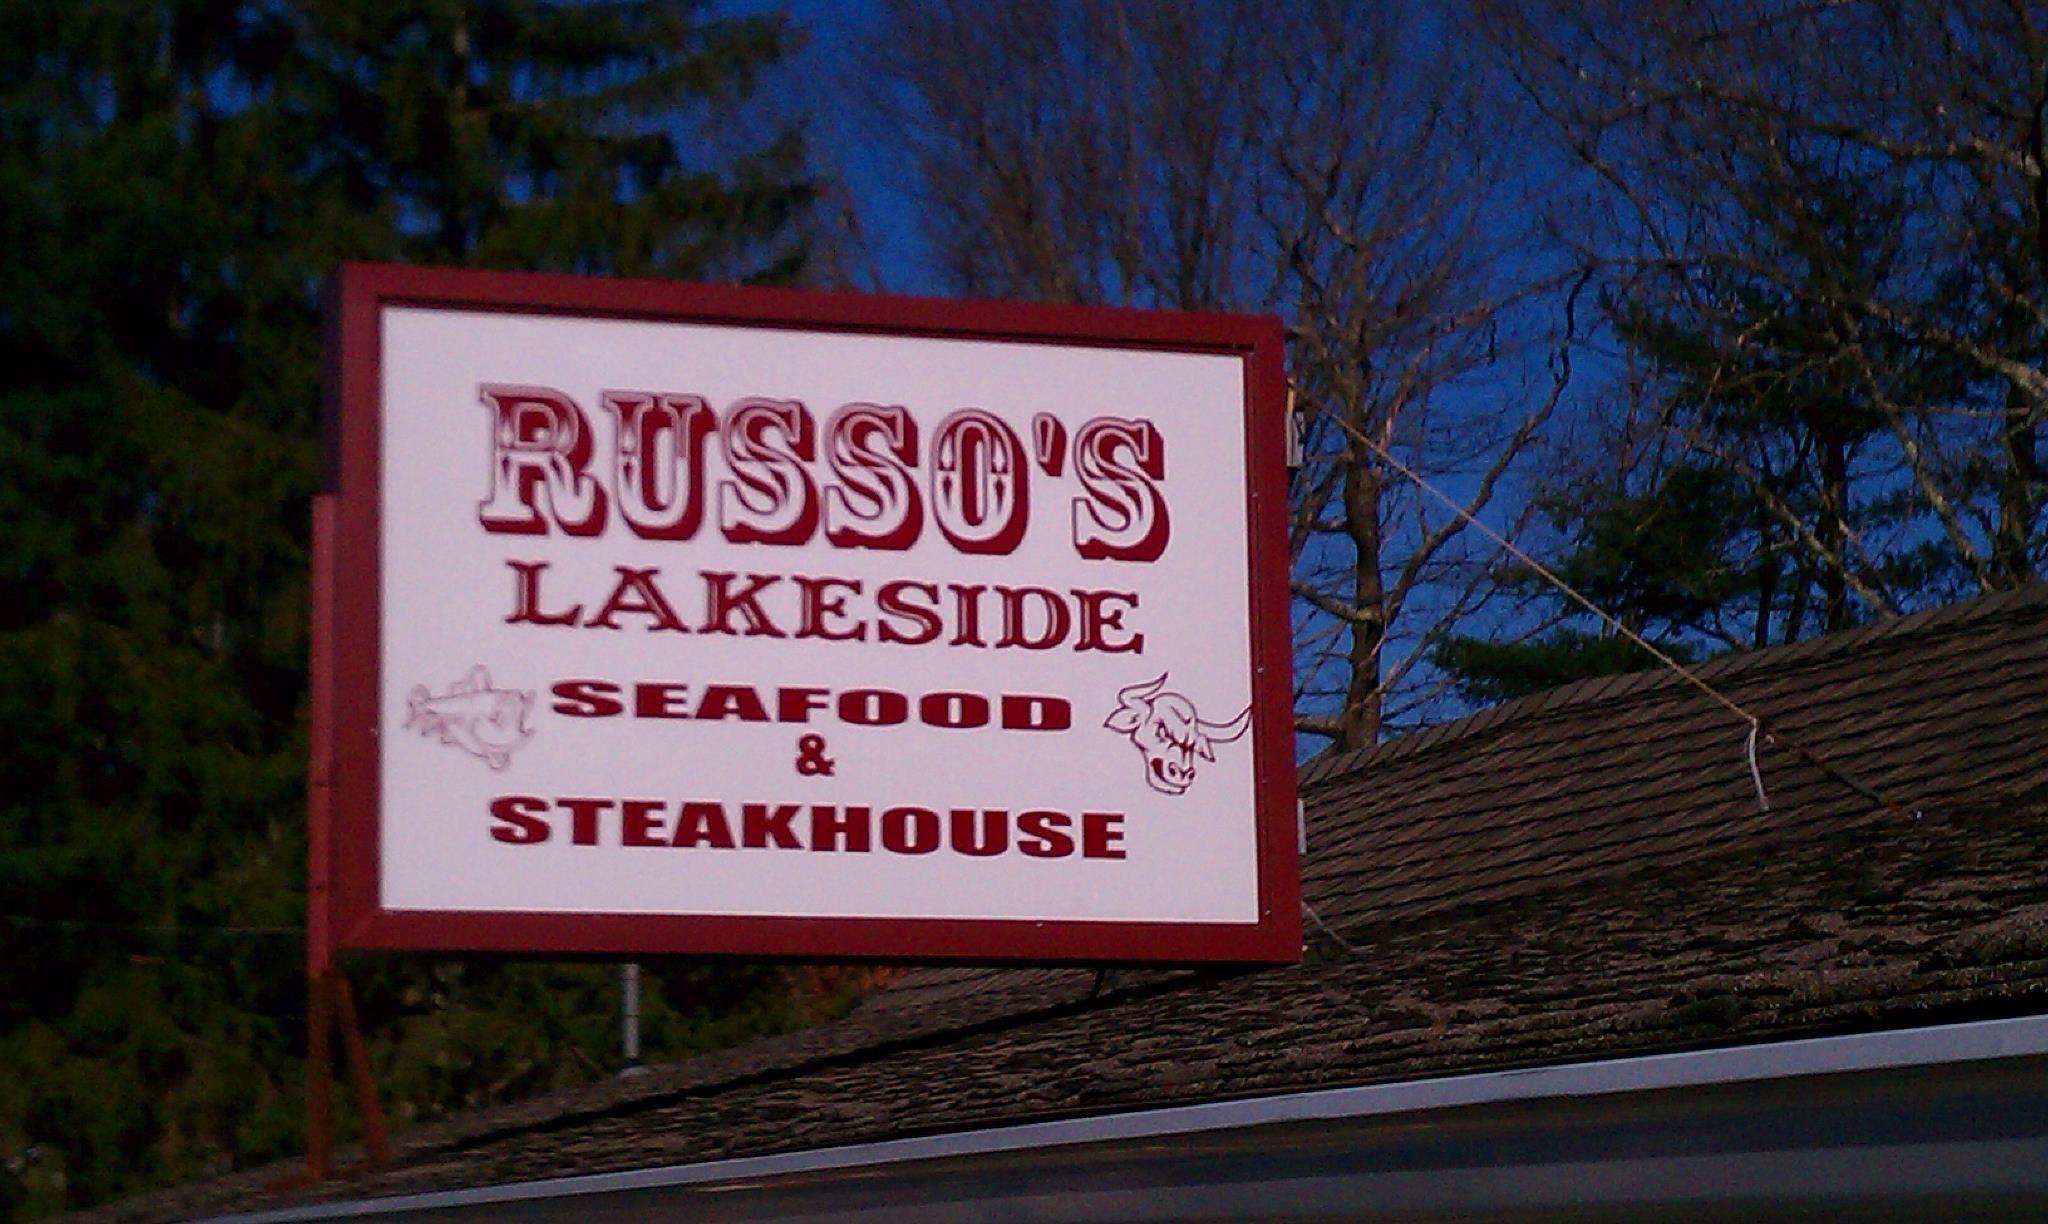 Pet Friendly Russo's Lakeside Seafood & Steakhouse